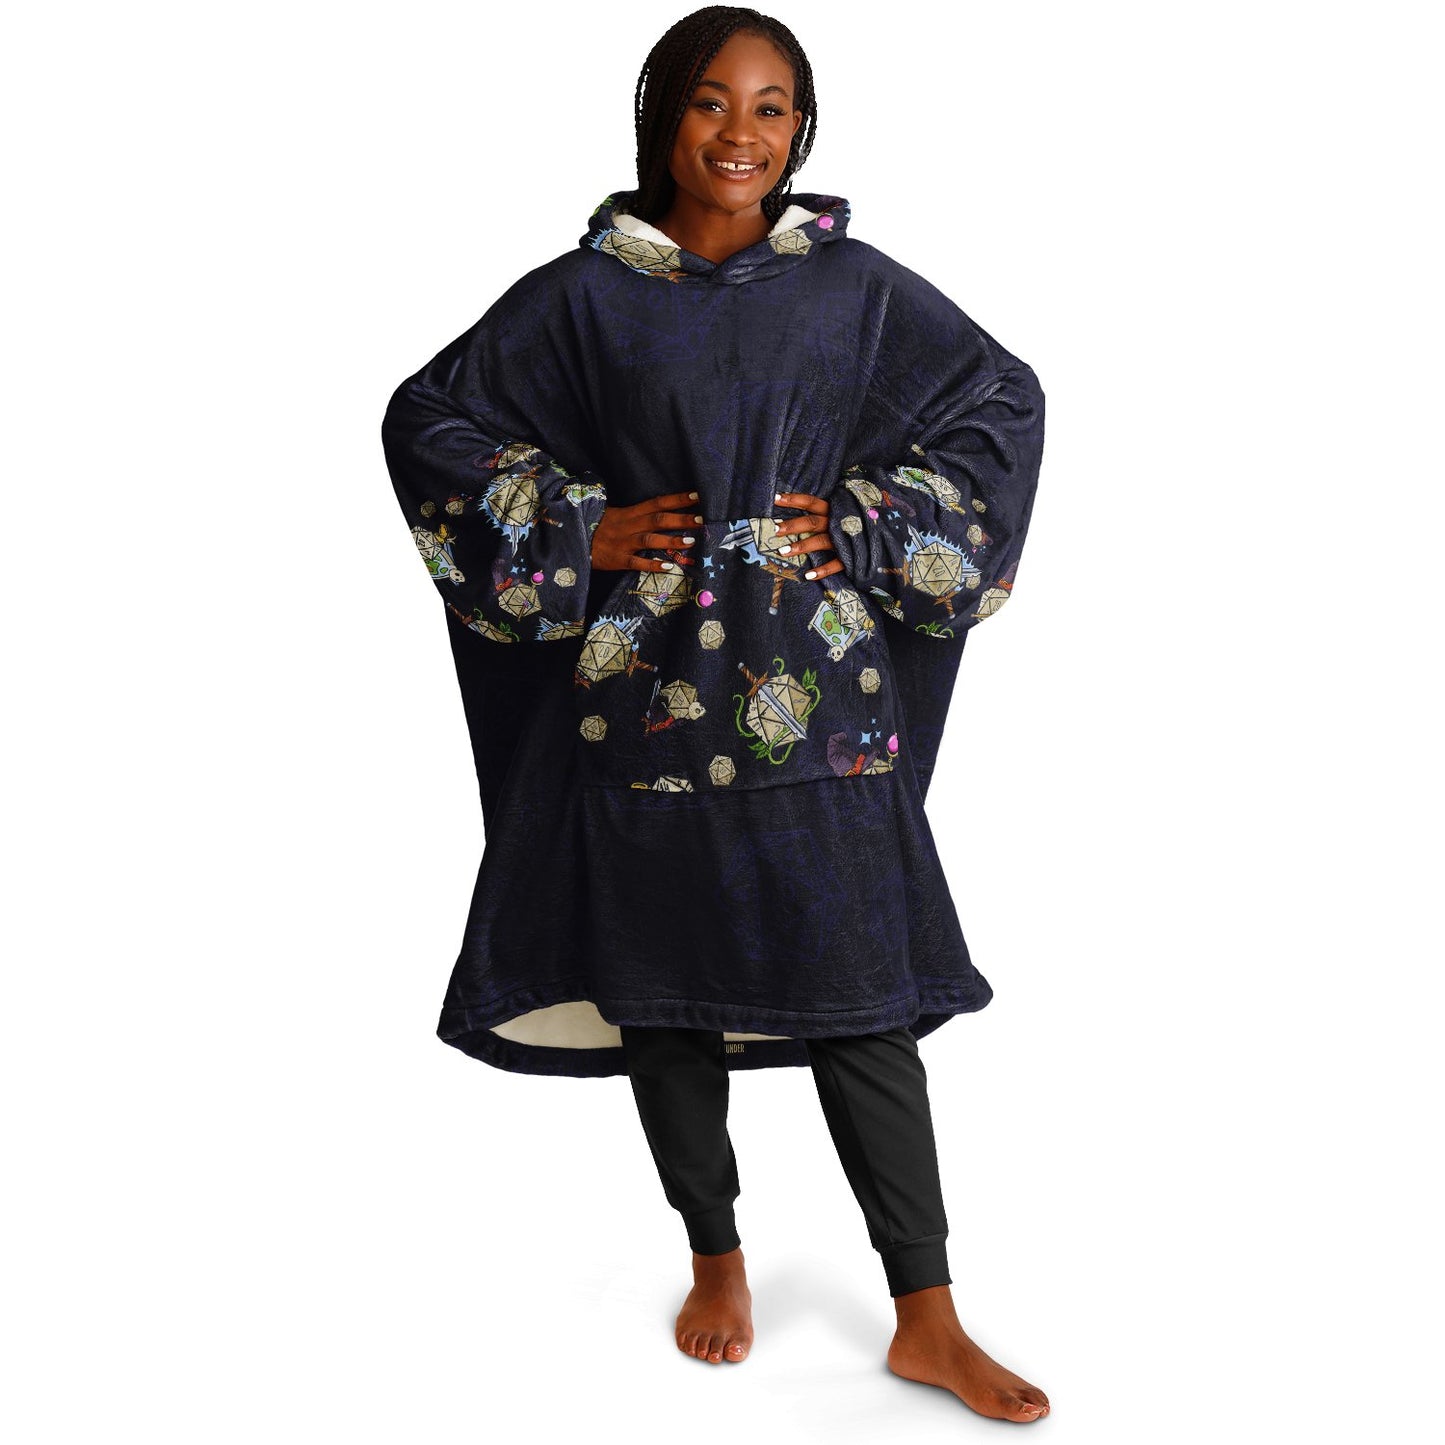 Couples Who Roll Together Stay Together All Over Print Super Hoodie Hooded Blanket - chaosandthunder